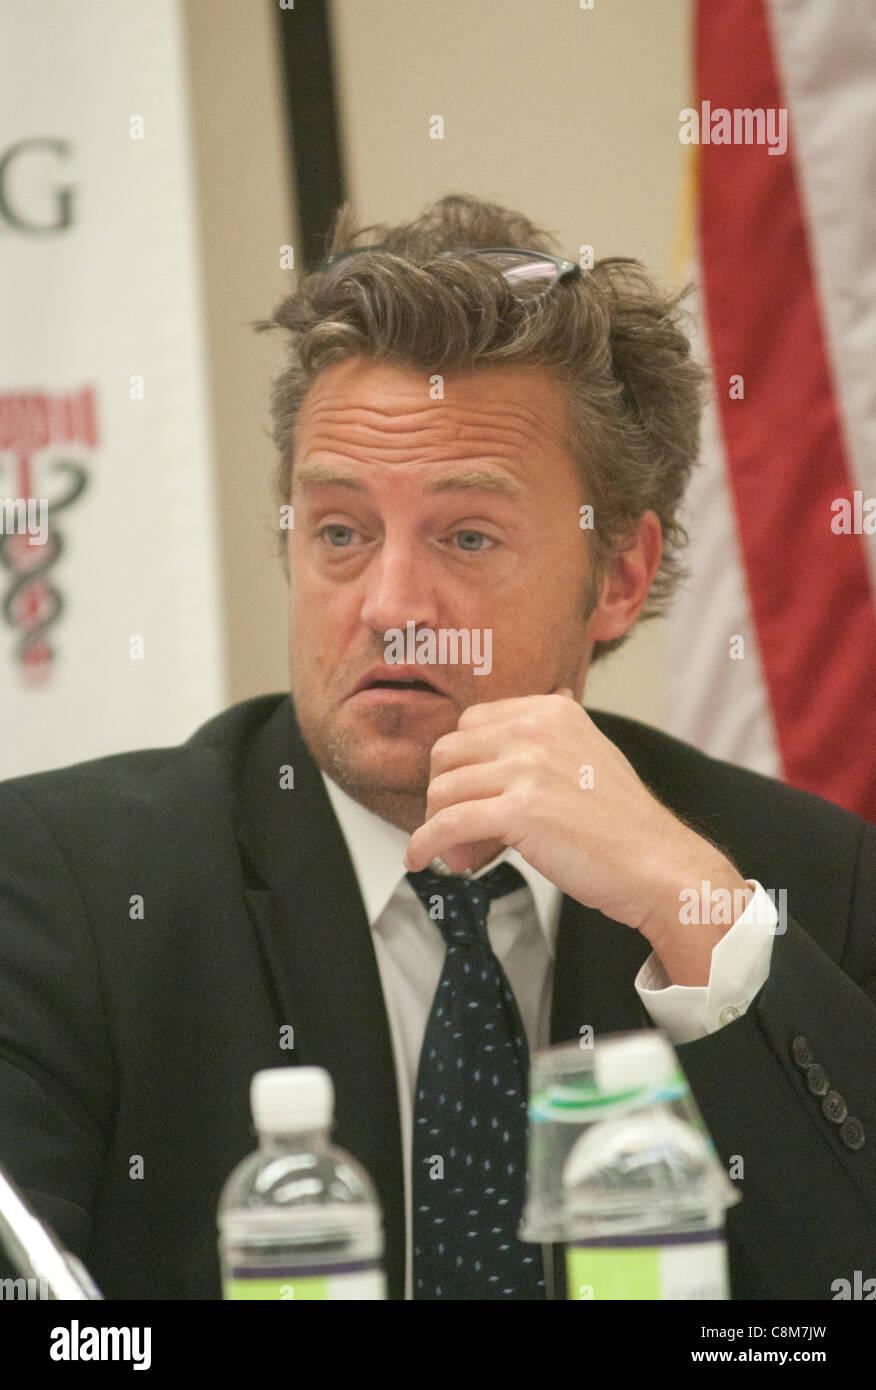 Actor Matthew Perry attends the National Association of Drug Court Professionals; and the House Addiction, Treatment and Recovery Caucus briefing on 'Drug Courts and Veterans Treatment Courts: A Proven Budget Solution Serving Our Veterans' on Capitol Hill in Washington D.C. on Thursday October 27, 2 Stock Photo